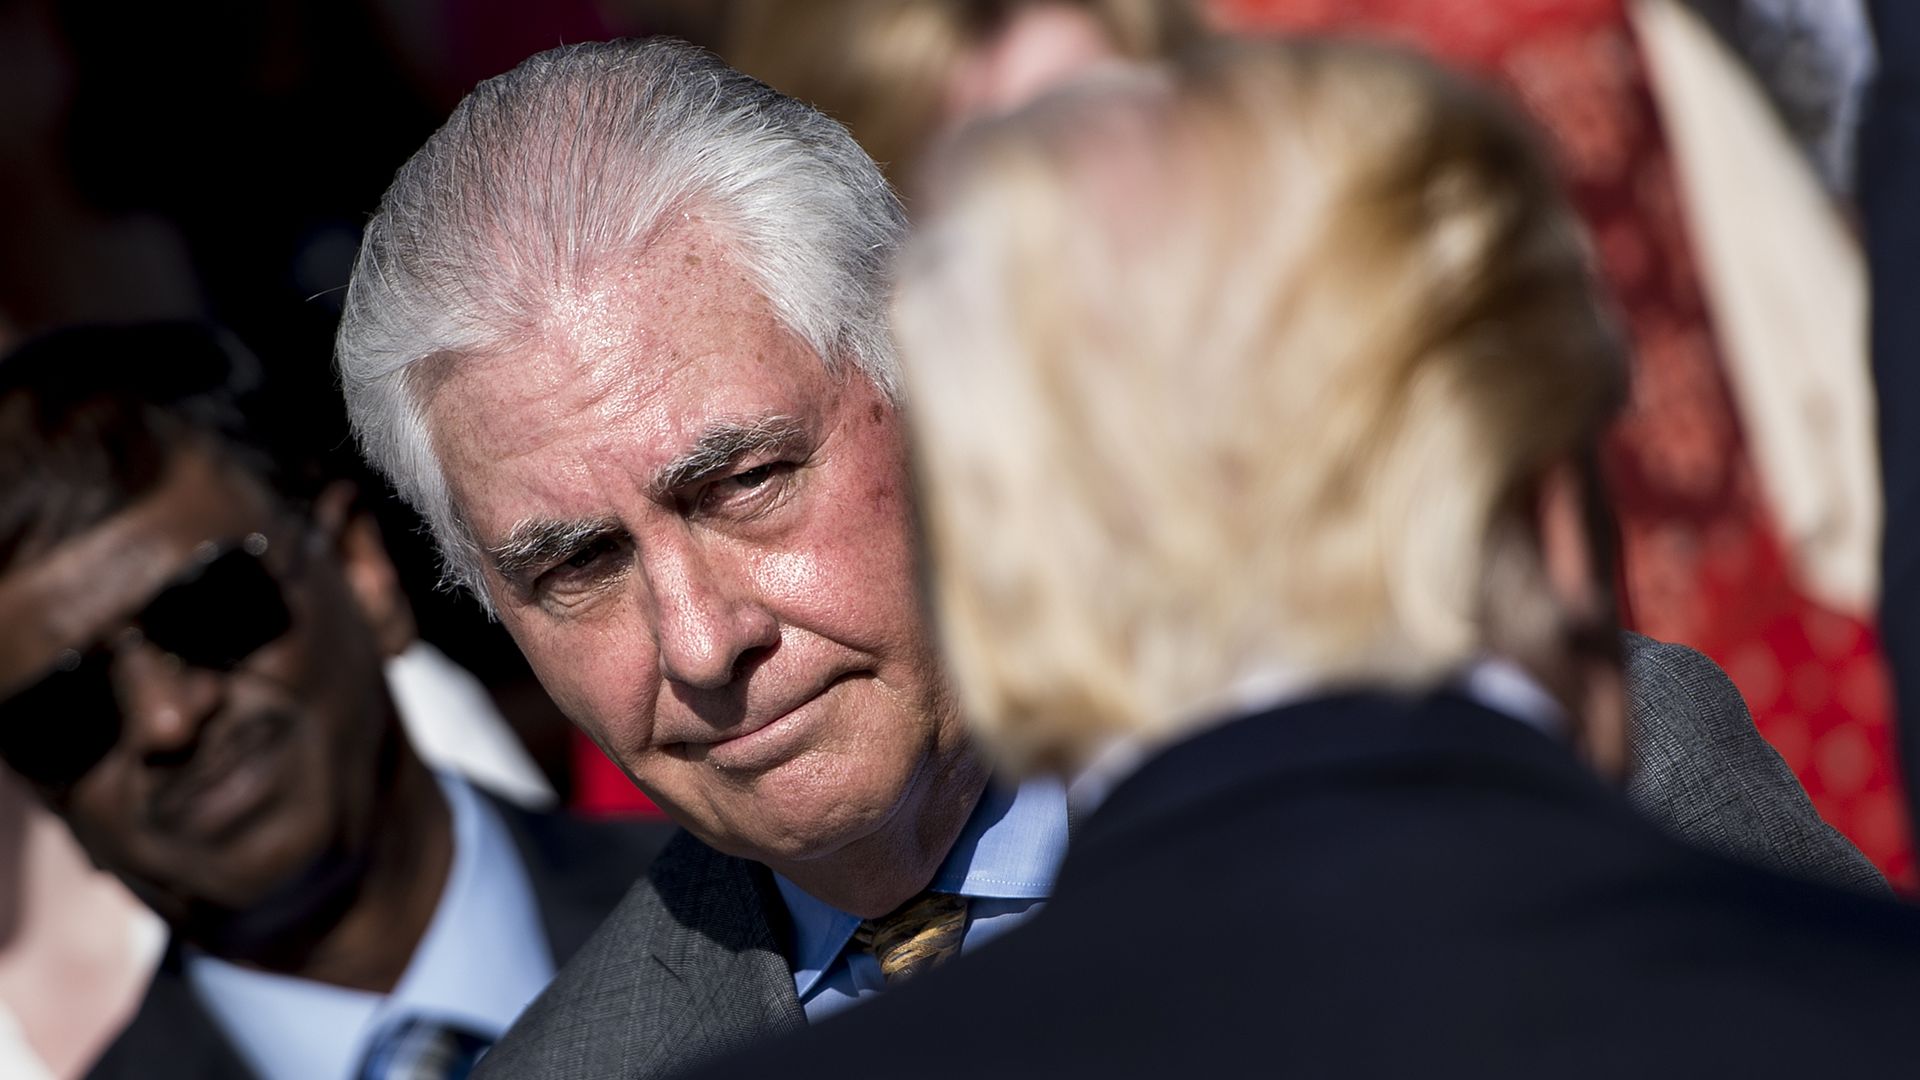 In this image, Tillerson looks at Trump. Only the back of Trump's head faces the camera. 